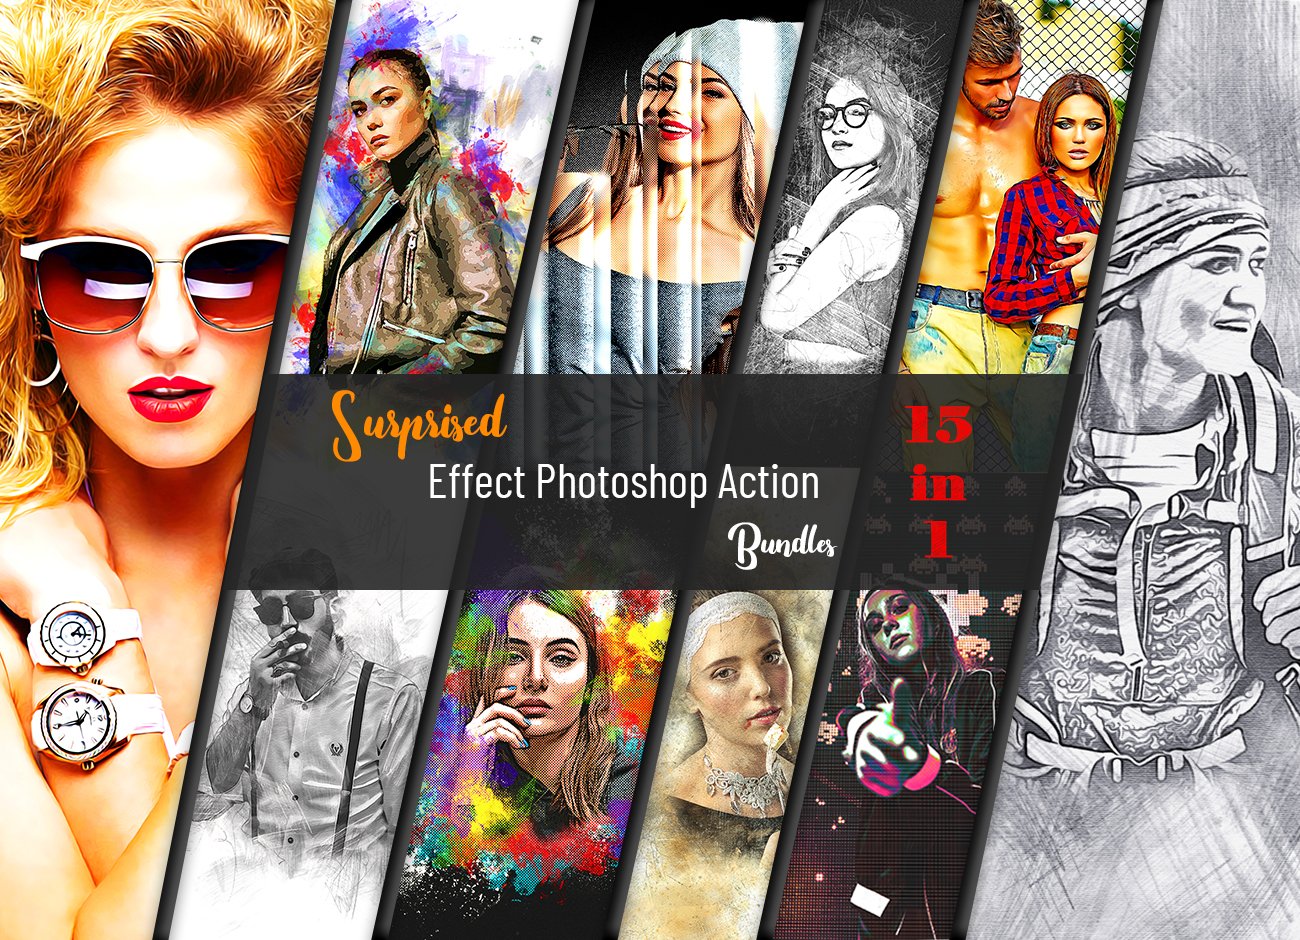 15 in 1 Surprised Effect PS Actioncover image.